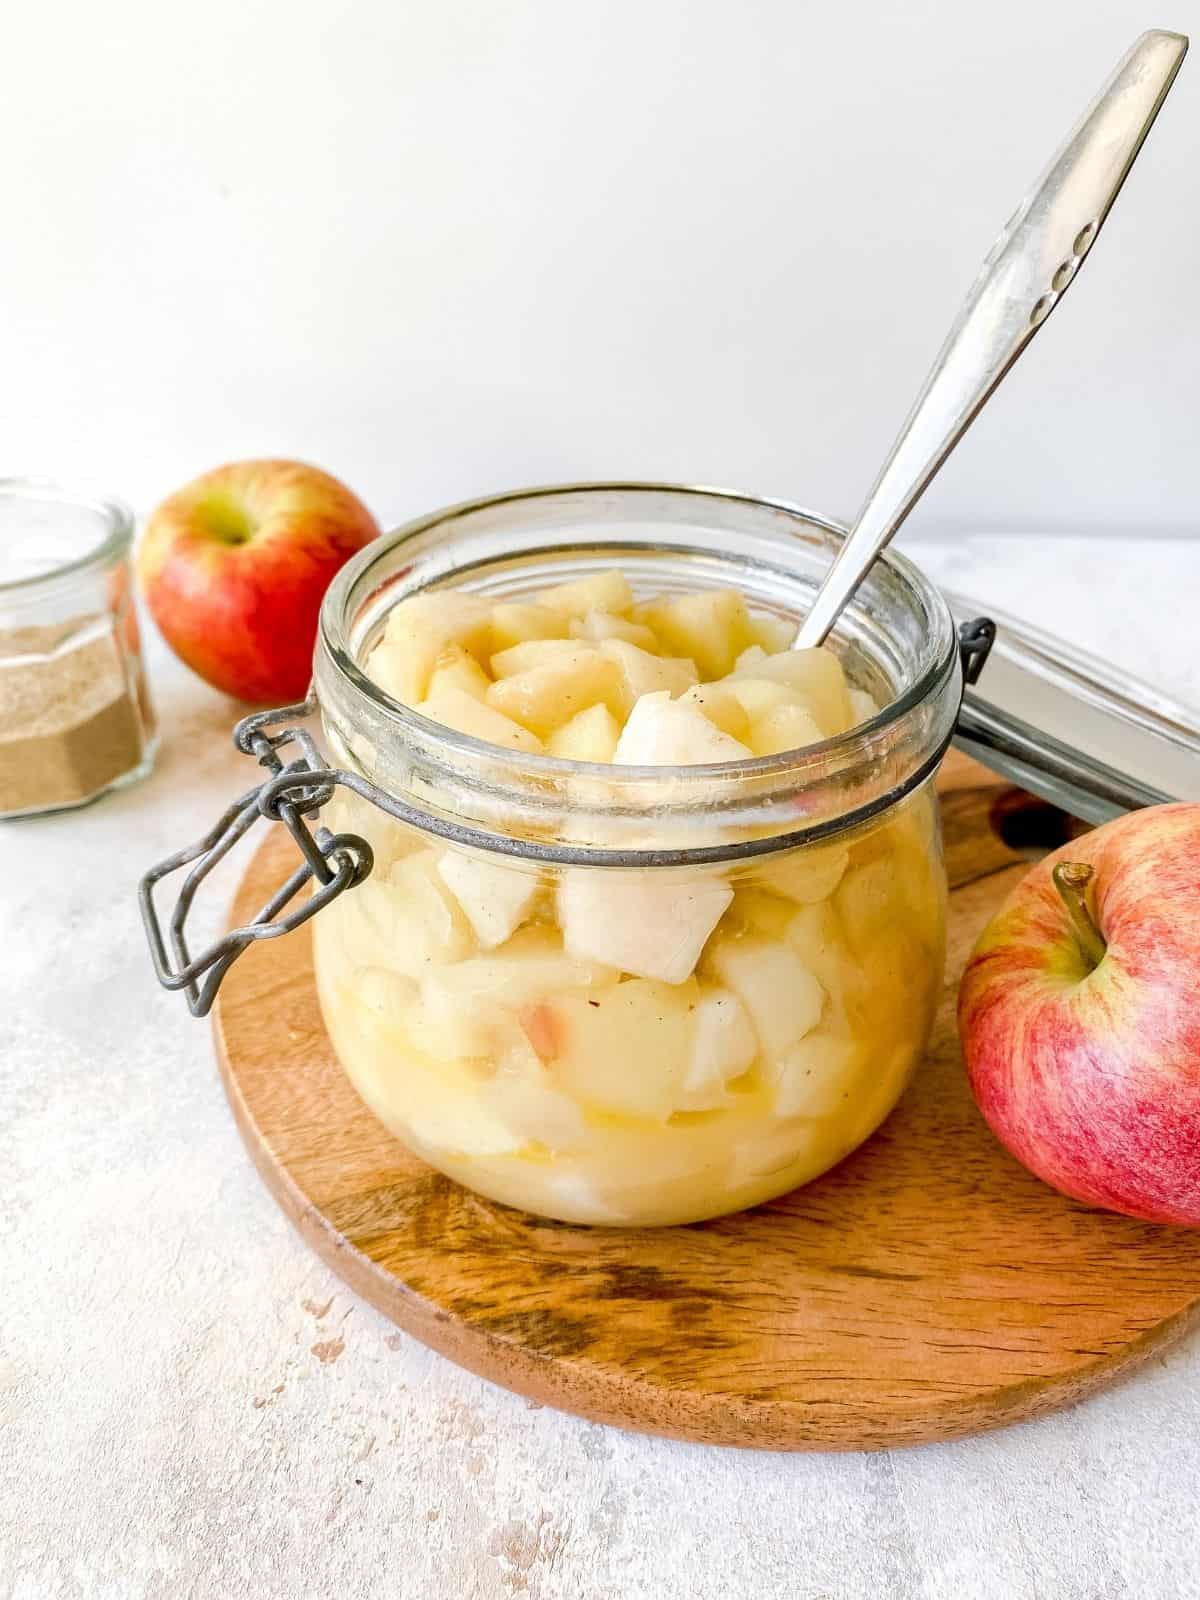 apple and pear compote in a glass jar.